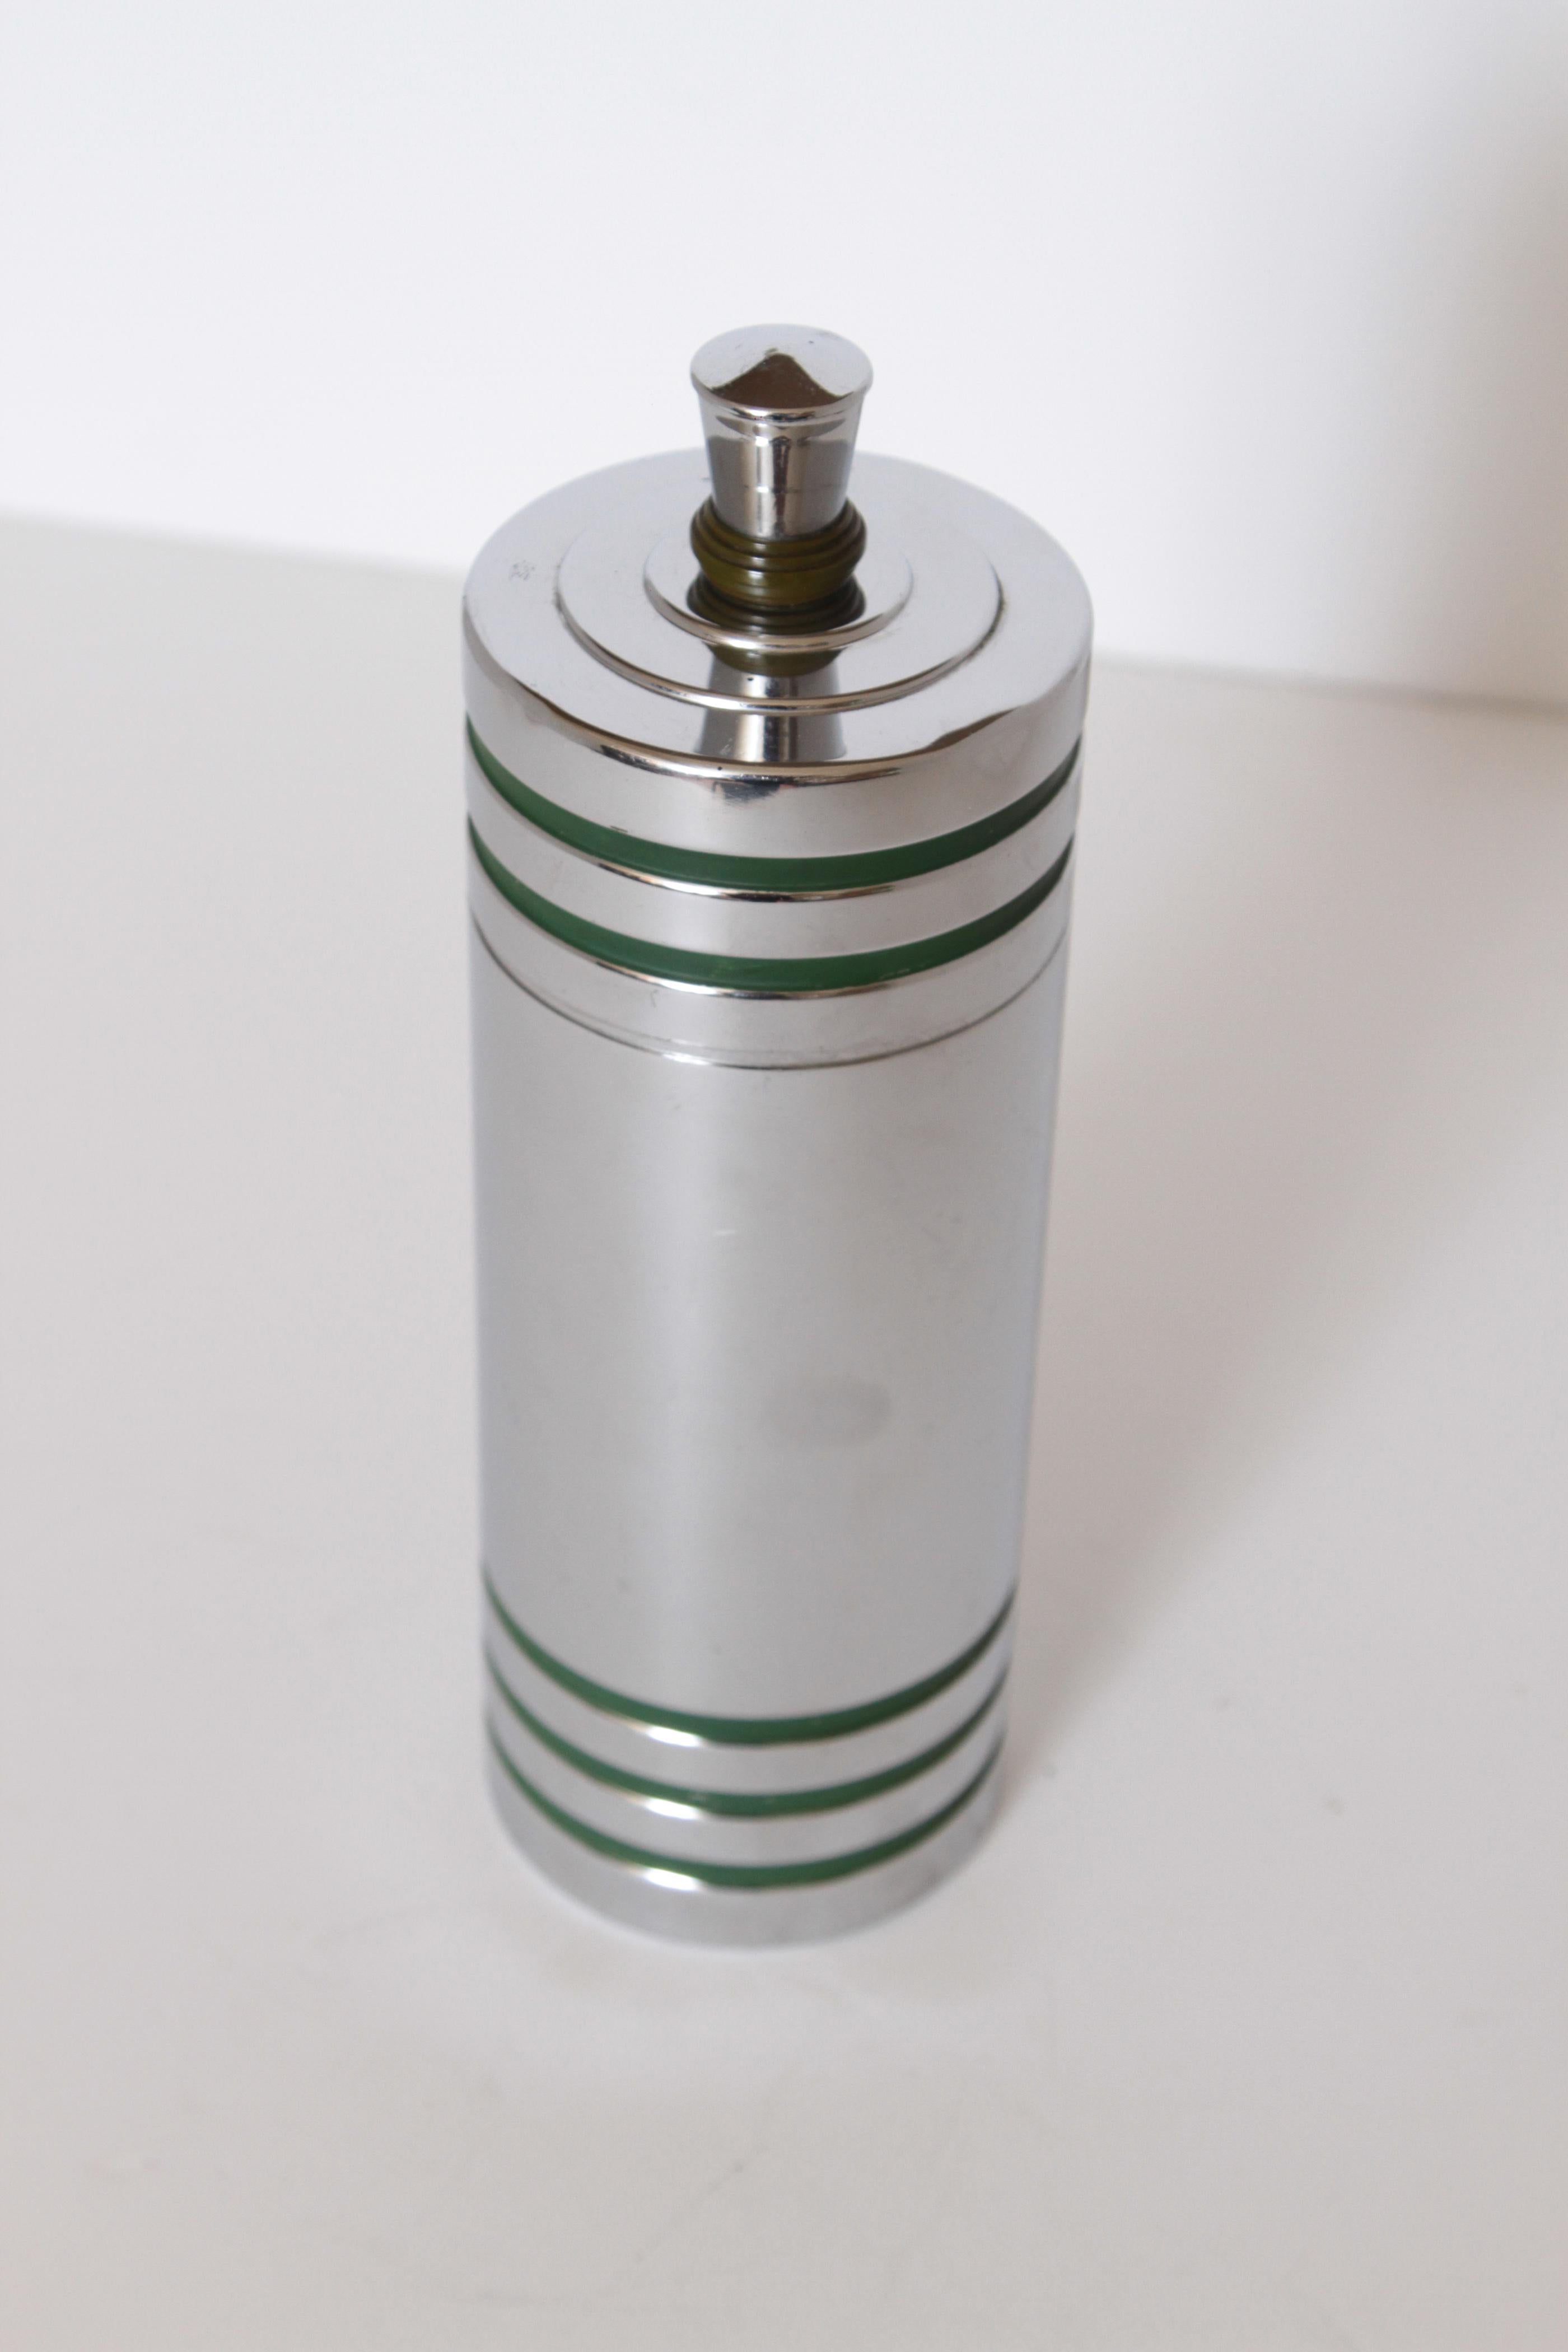 Machine Age Art Deco Chase Gaiety cocktail shaker in rare green Catalin by Howard Reichenbach.

Debuting in 1934, and continuing until at least 1942, the Gaiety shaker (cat # 90034) was undoubtedly one of Chase's most popular items. Truly great